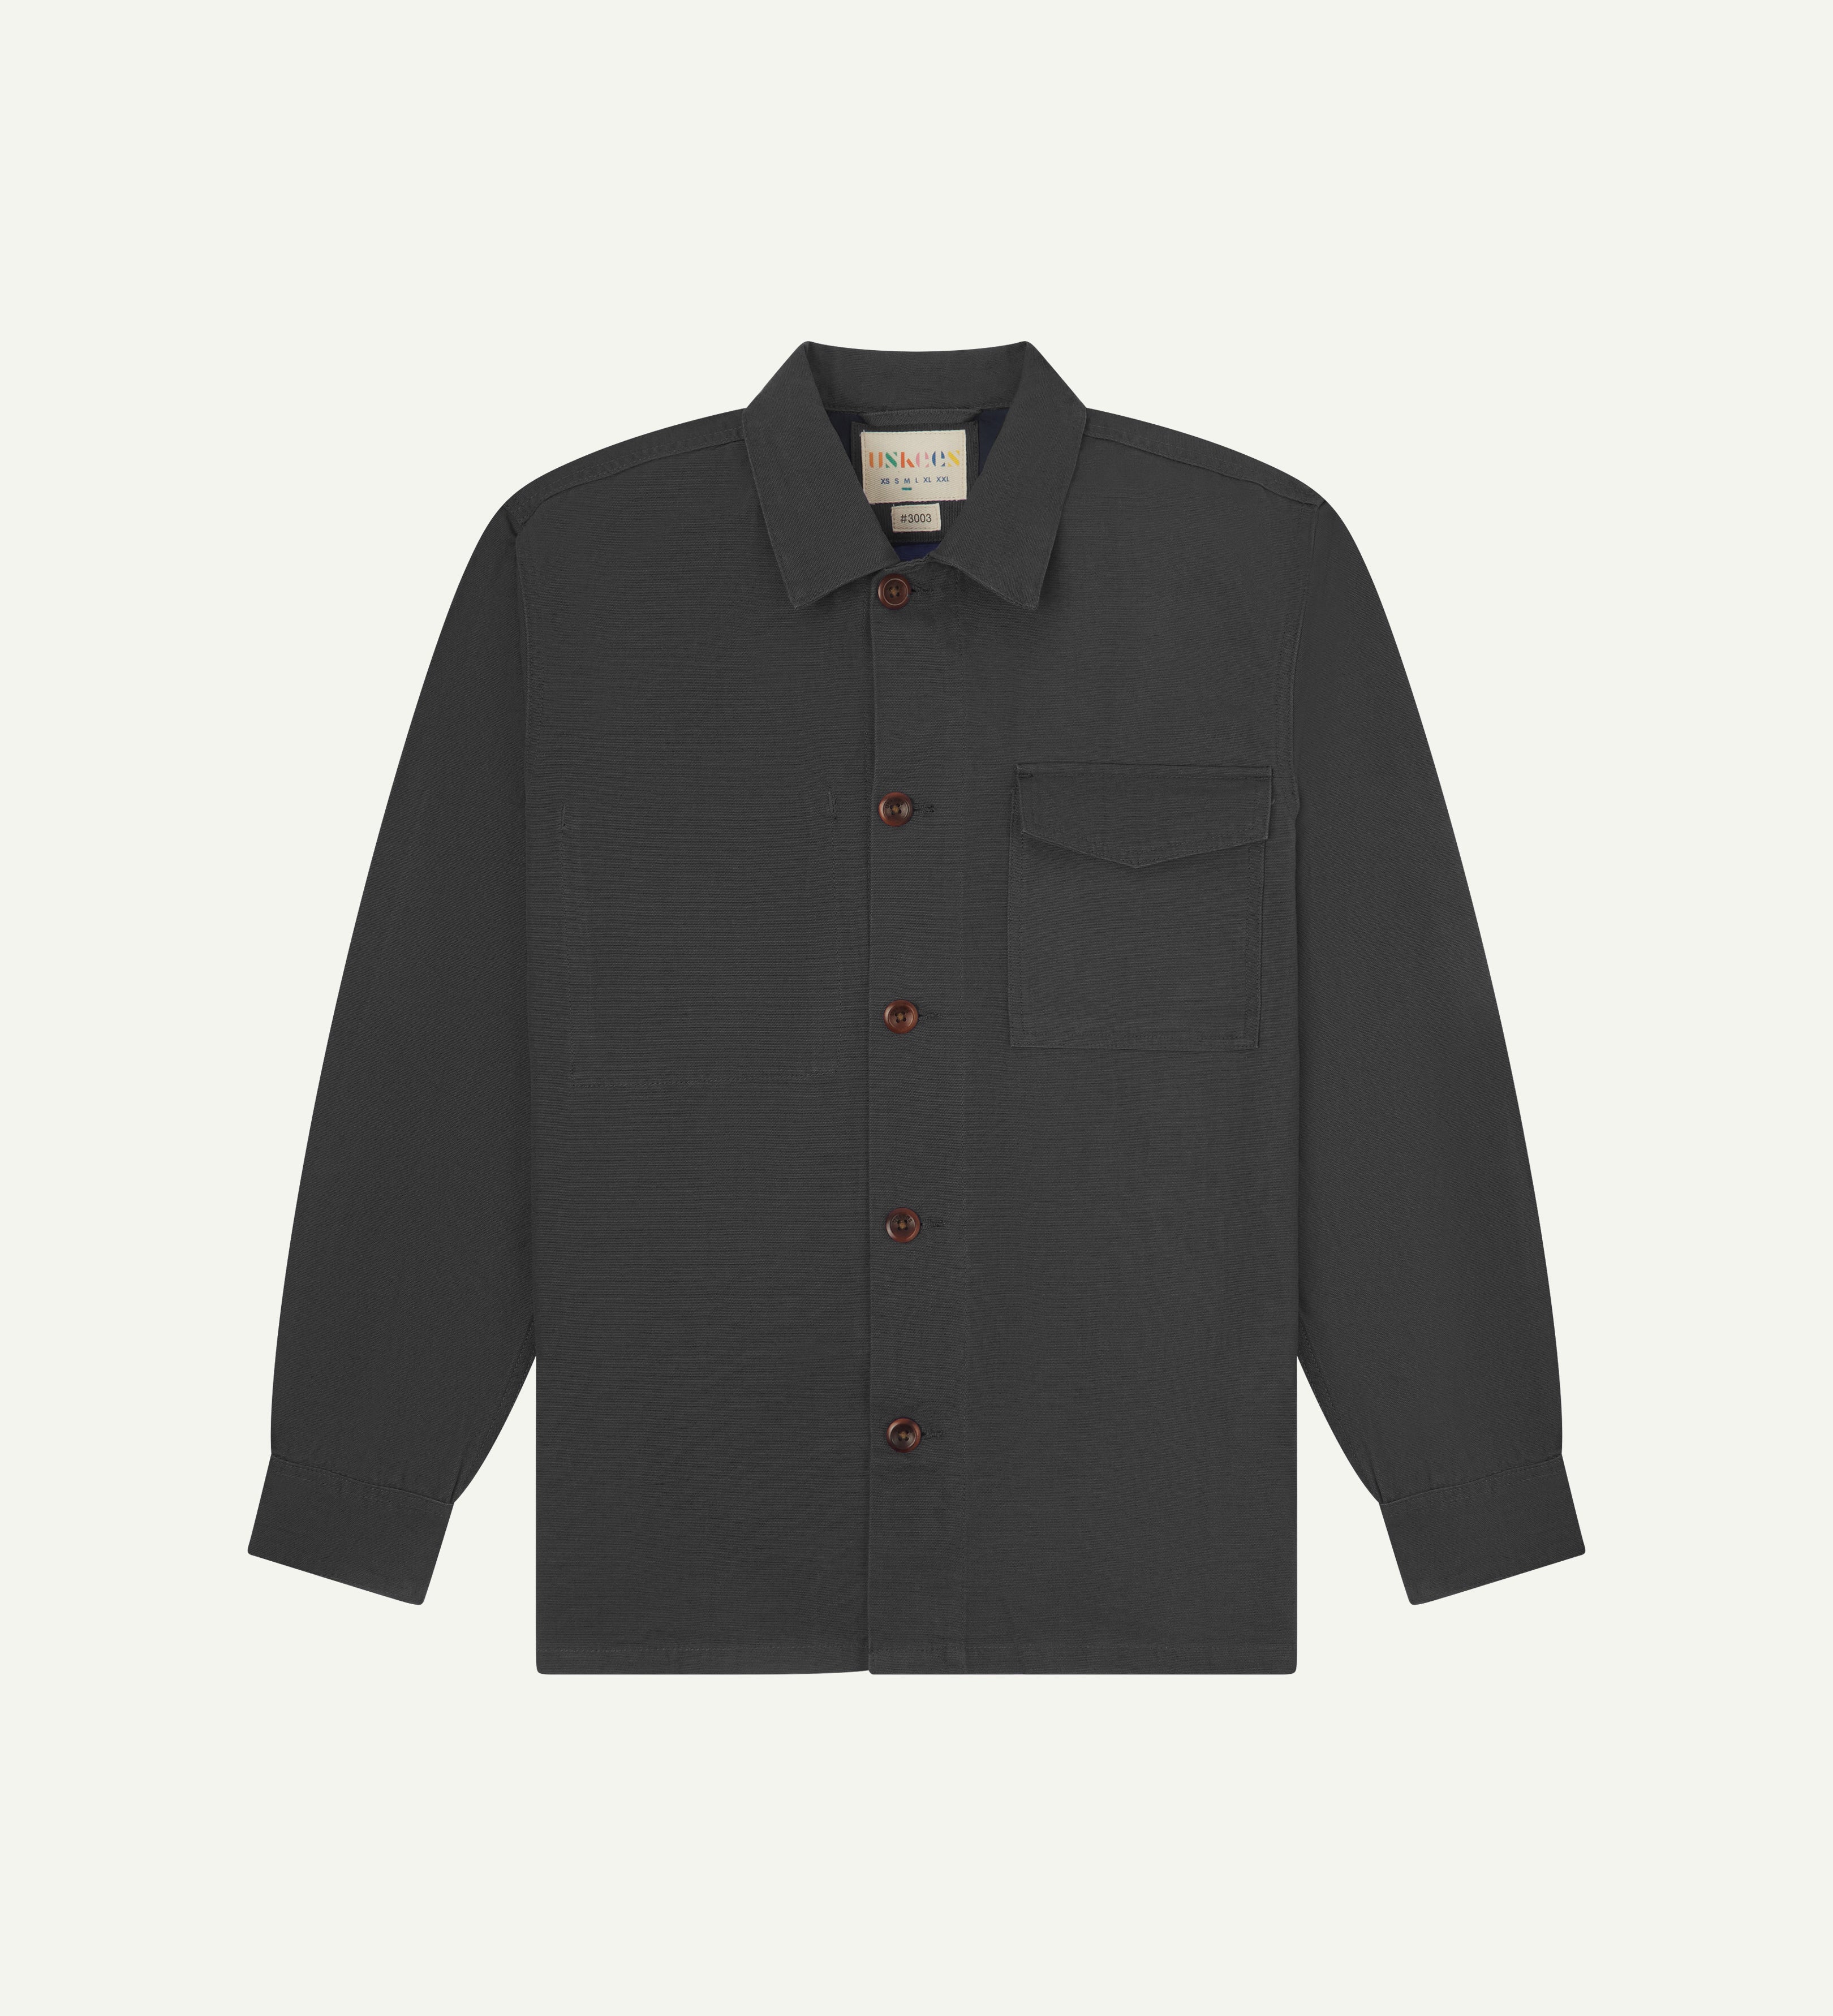 Front flat view of dark grey buttoned 3003 workshirt from Uskees. Showing breast pocket, navy yoke lining and brown corozo buttons